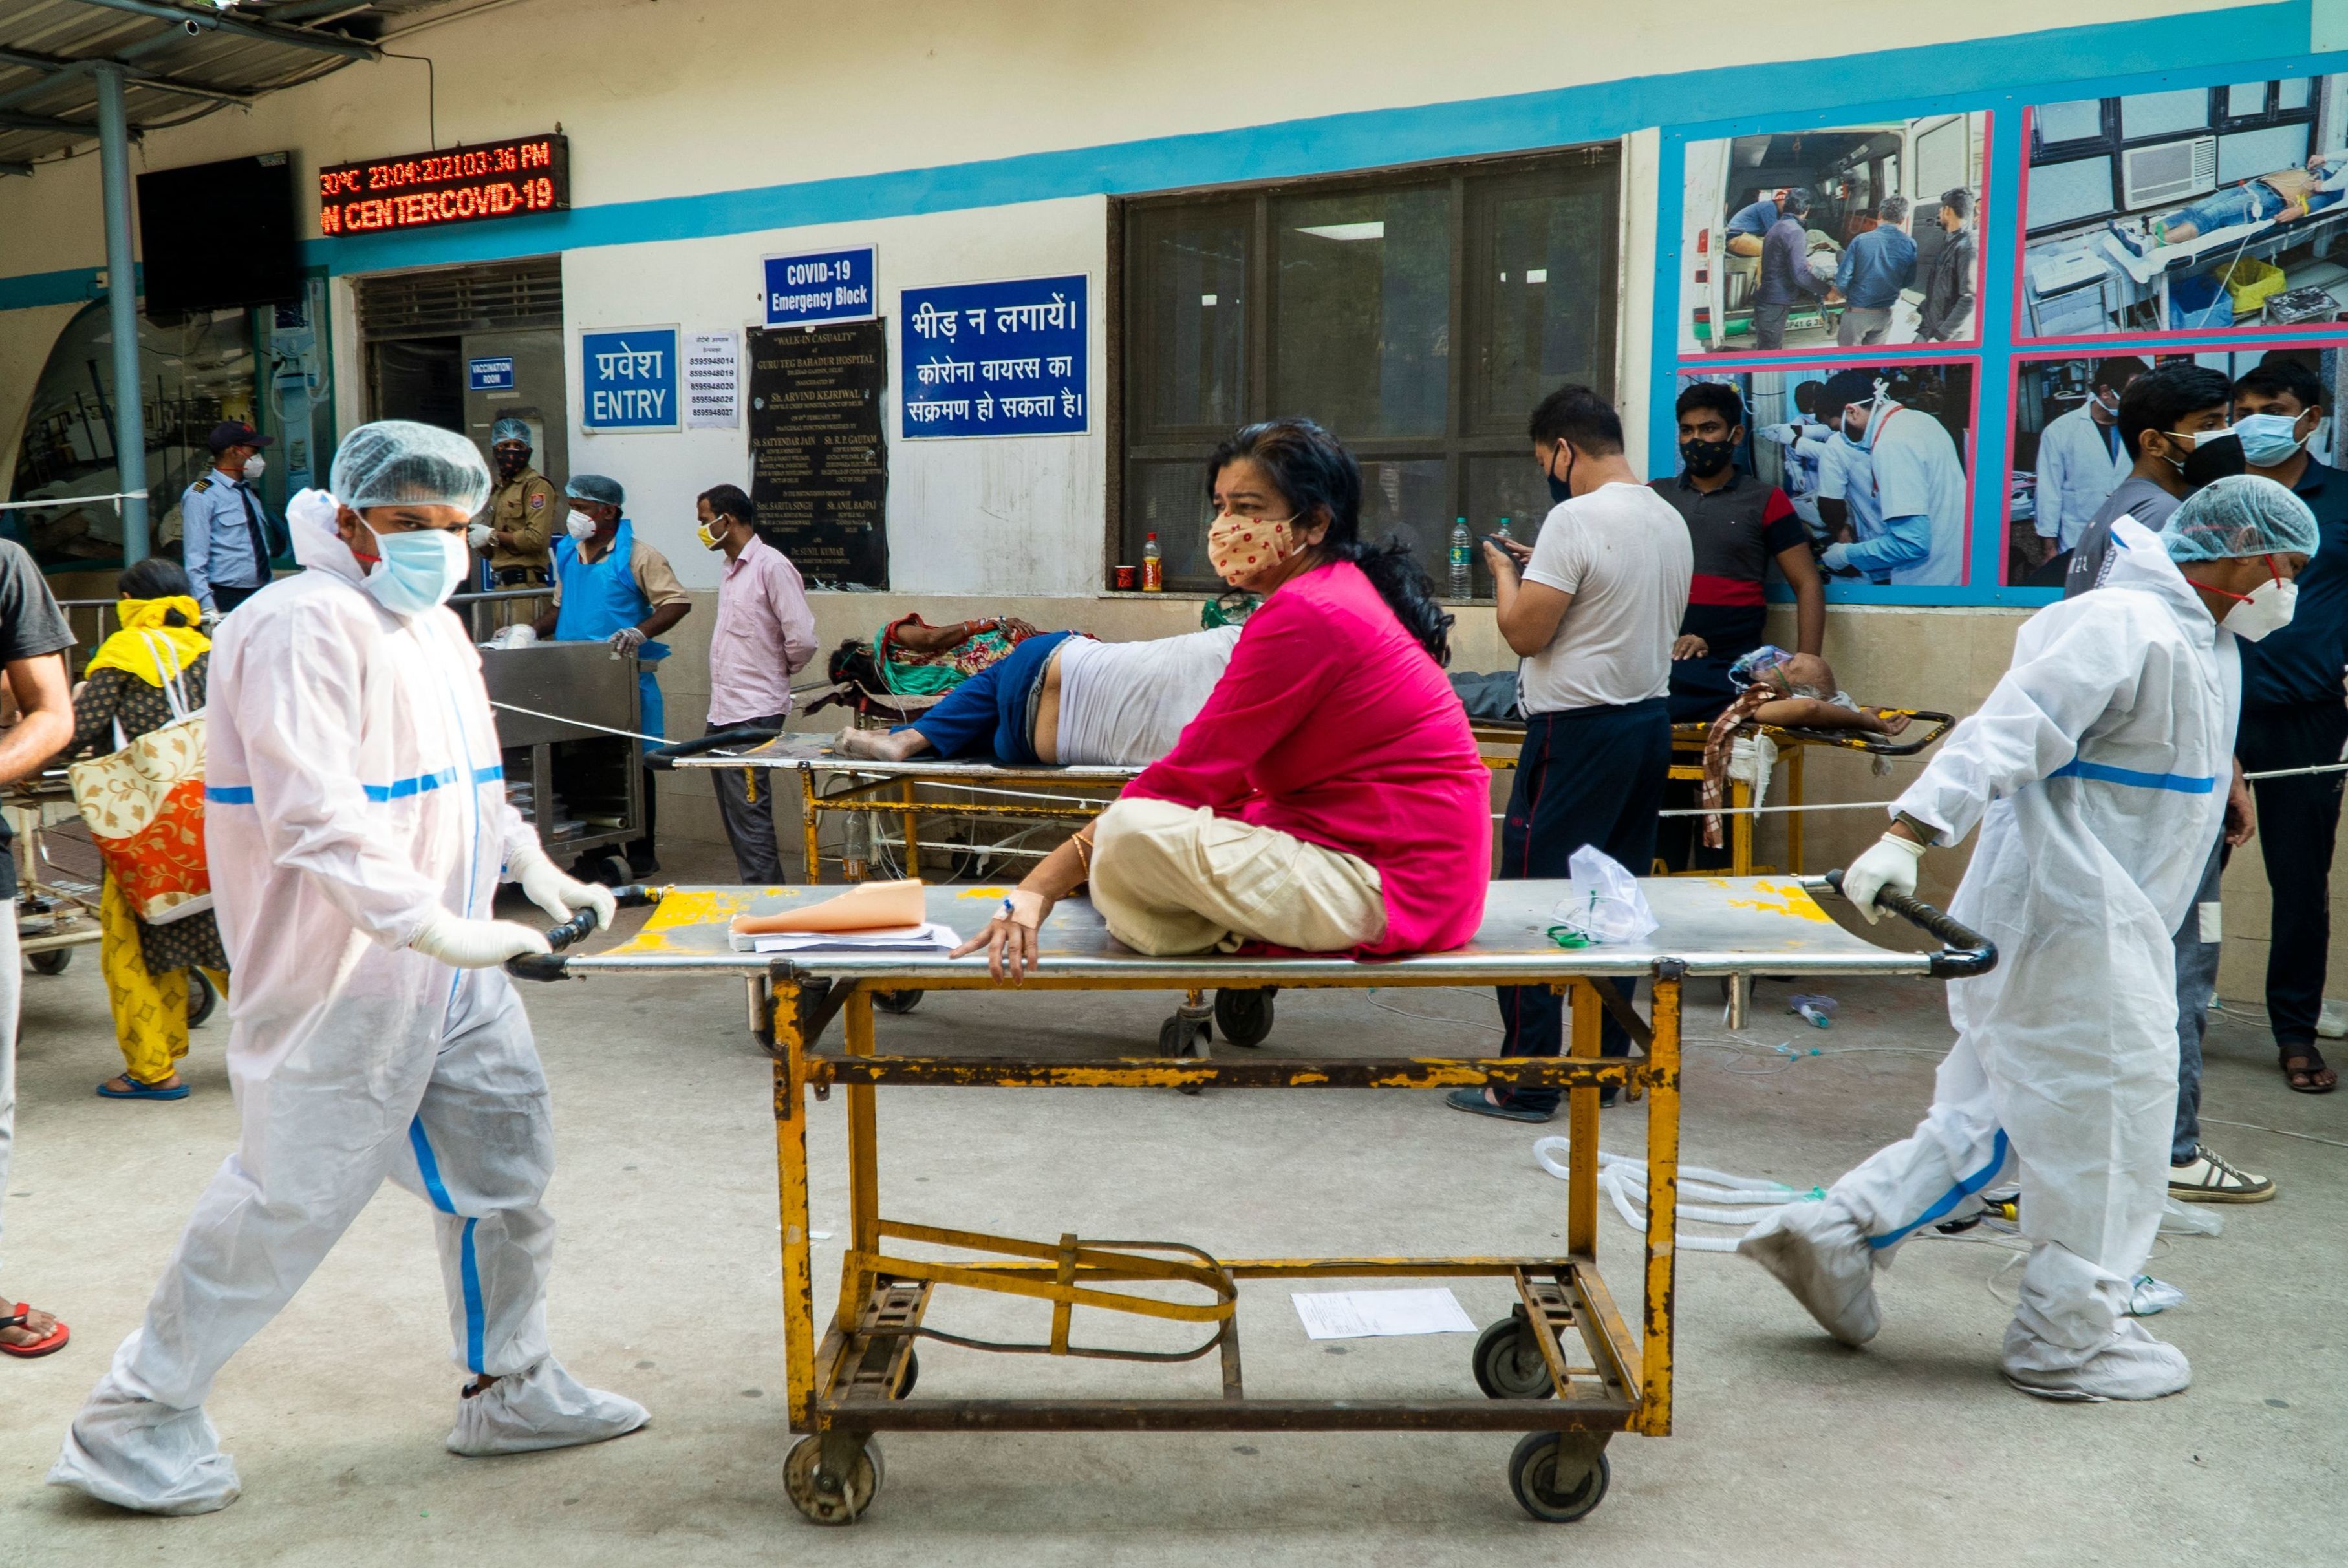 Health workers transport a COVID-19 patient in a hospital complex